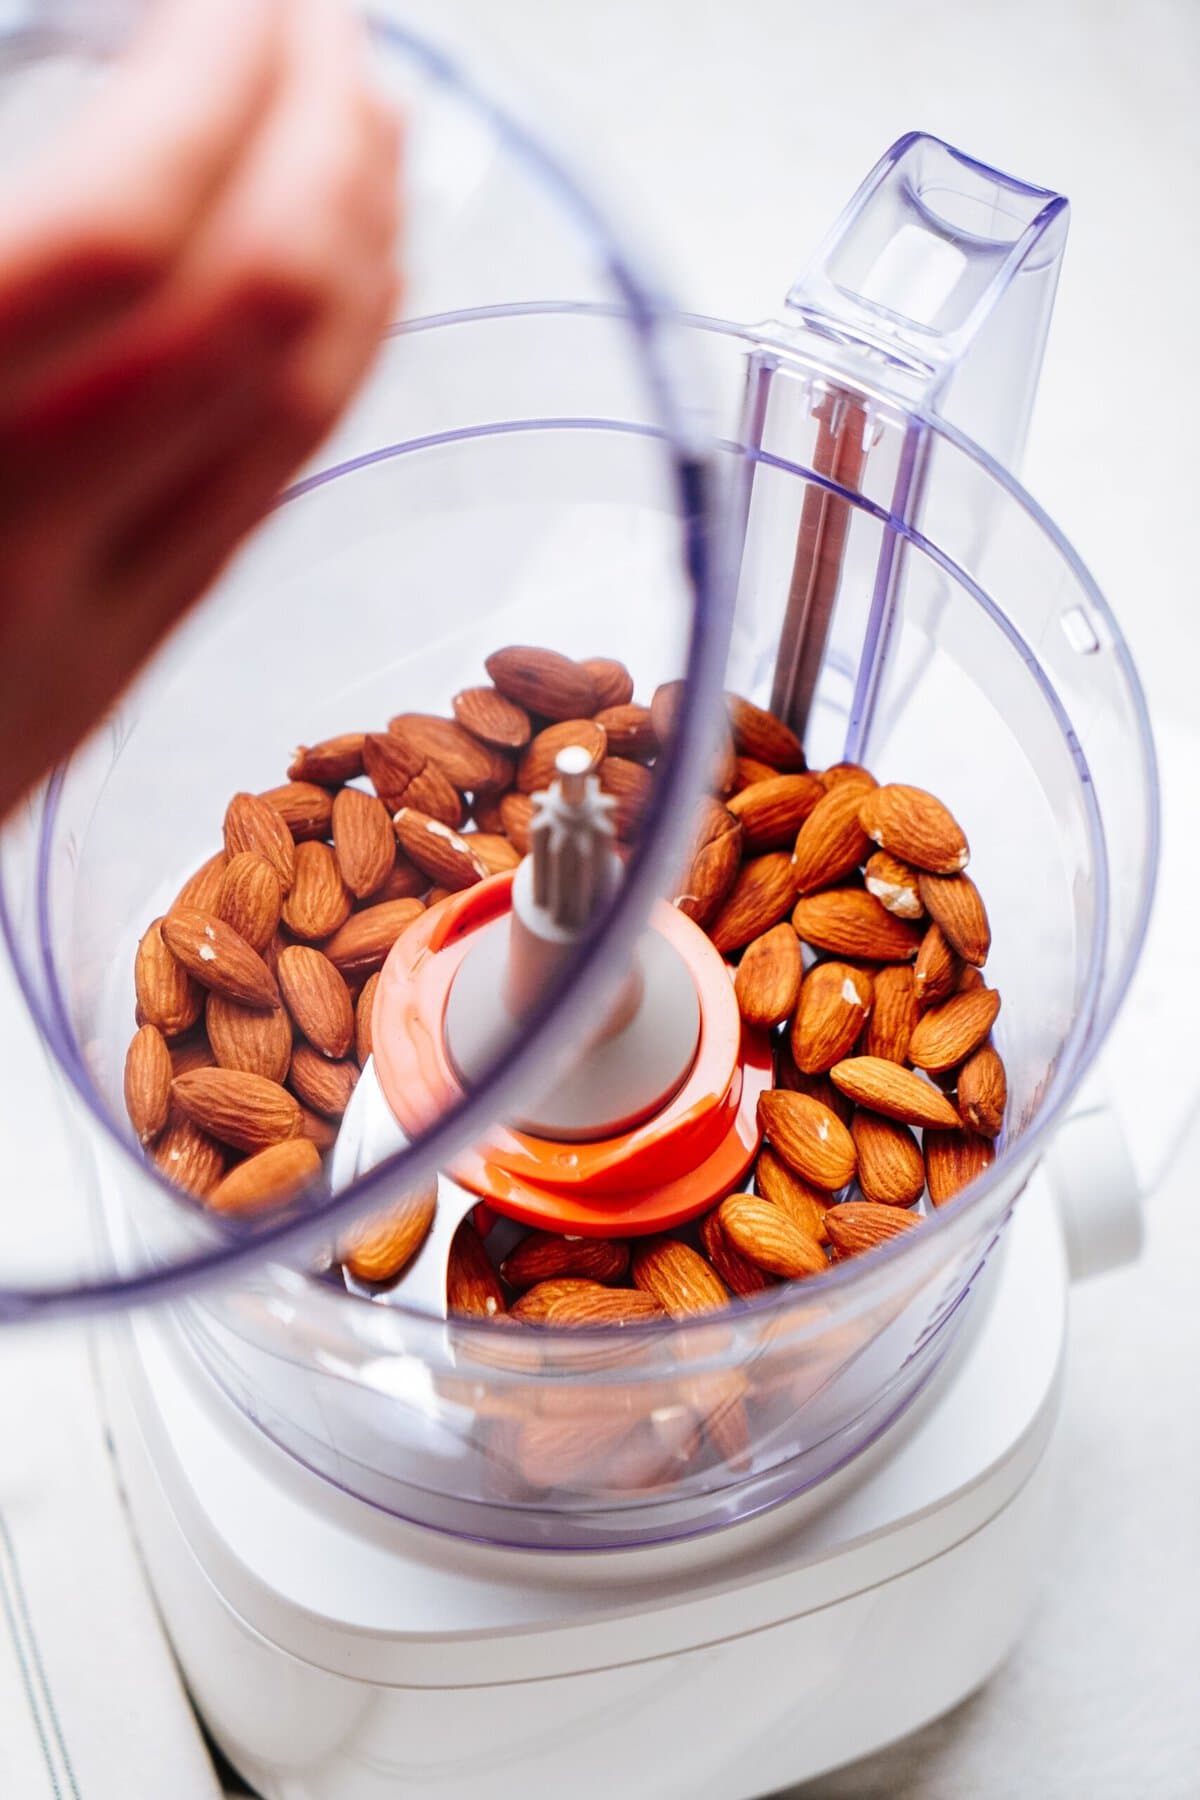 A person is placing a lid on a food processor filled with whole almonds, getting ready to turn them into the perfect base for delicious goat cheese truffles.